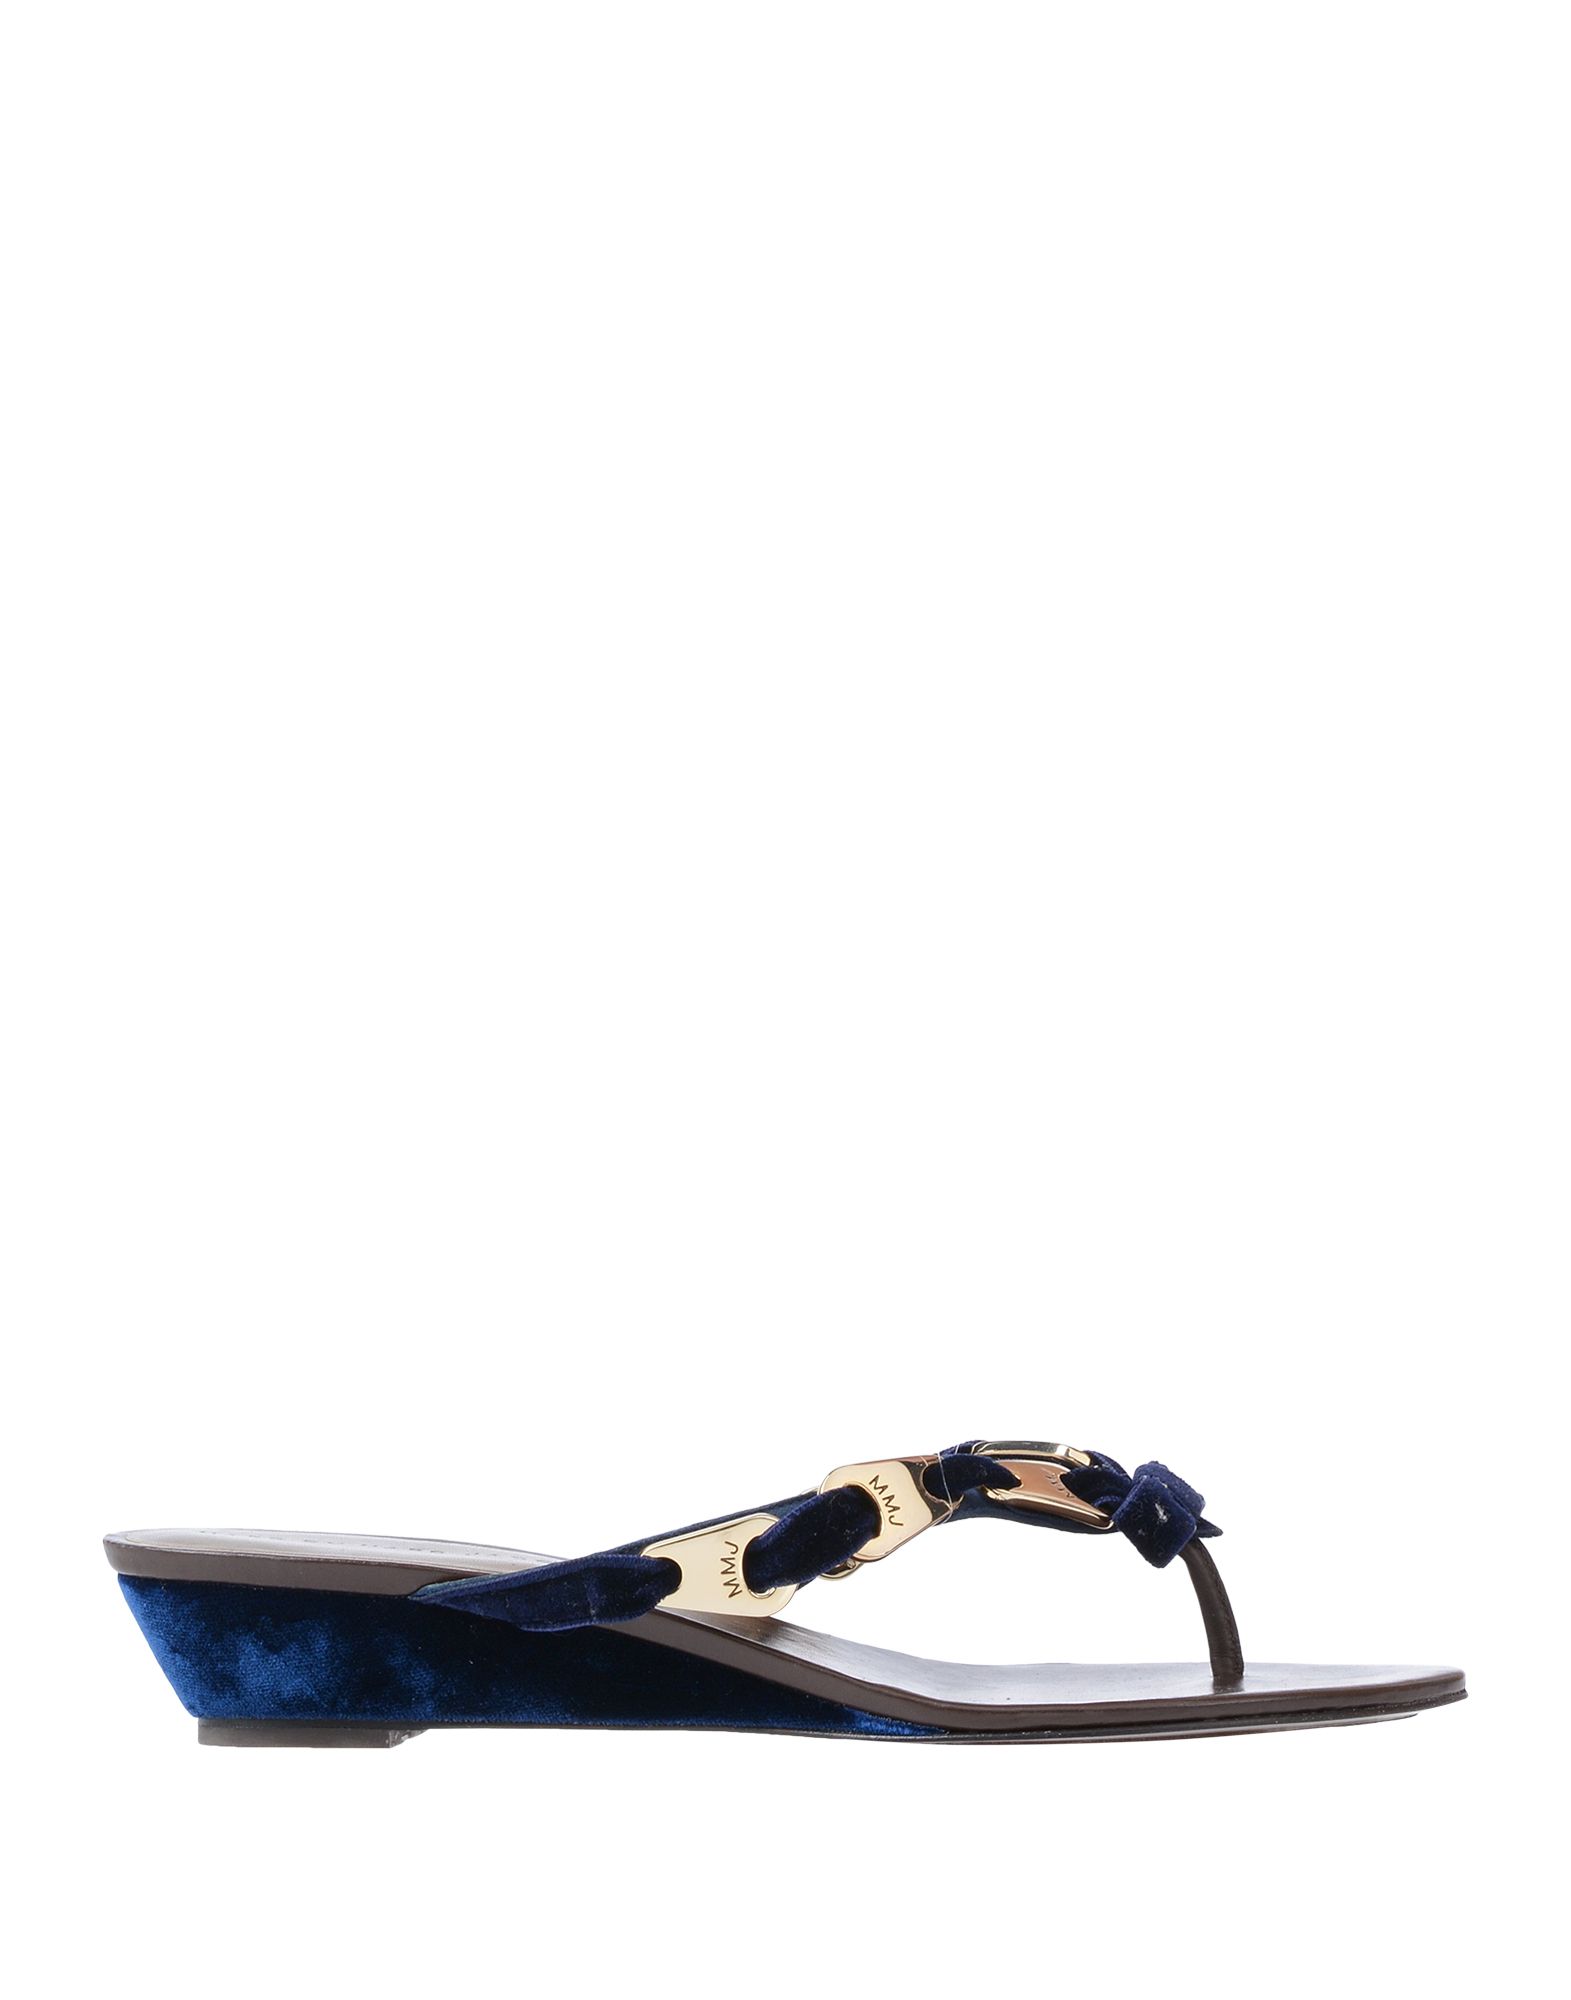 MARC BY MARC JACOBS Flip flops,11673514VF 12